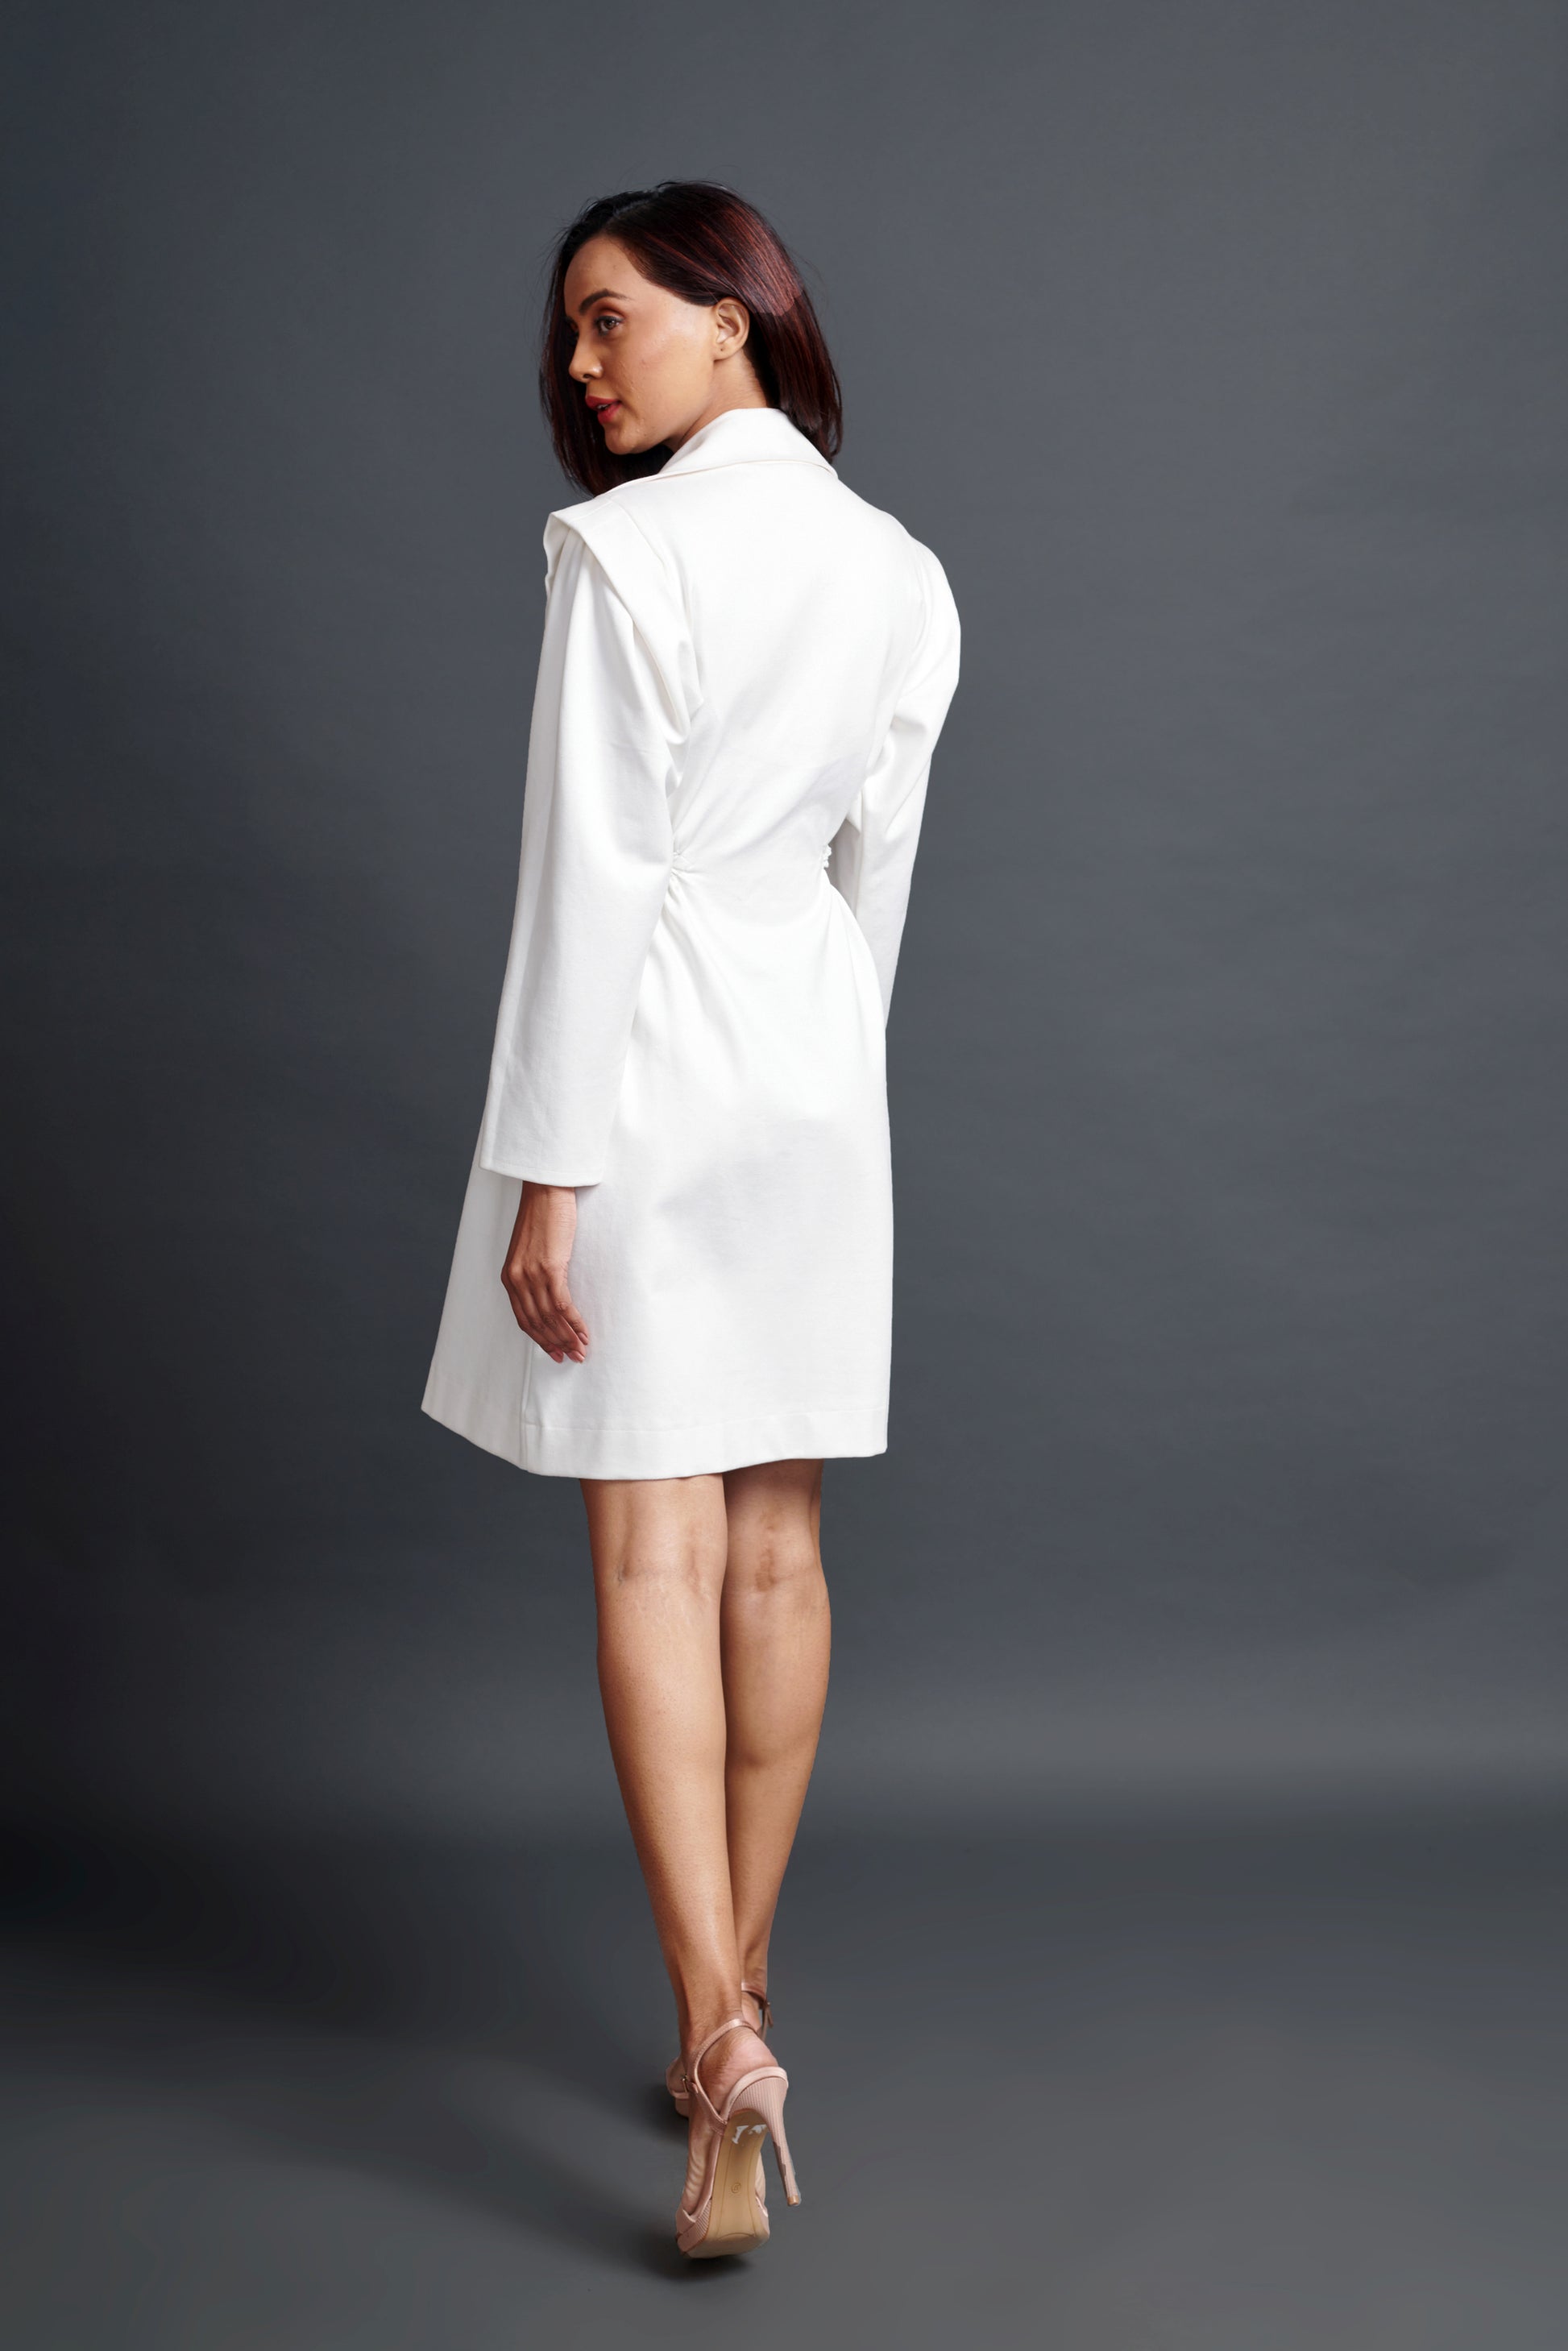 Image of WHITE SIDE CUT JACKET DRESS WITH NEON FLOWER BELT, From savoirfashions.com